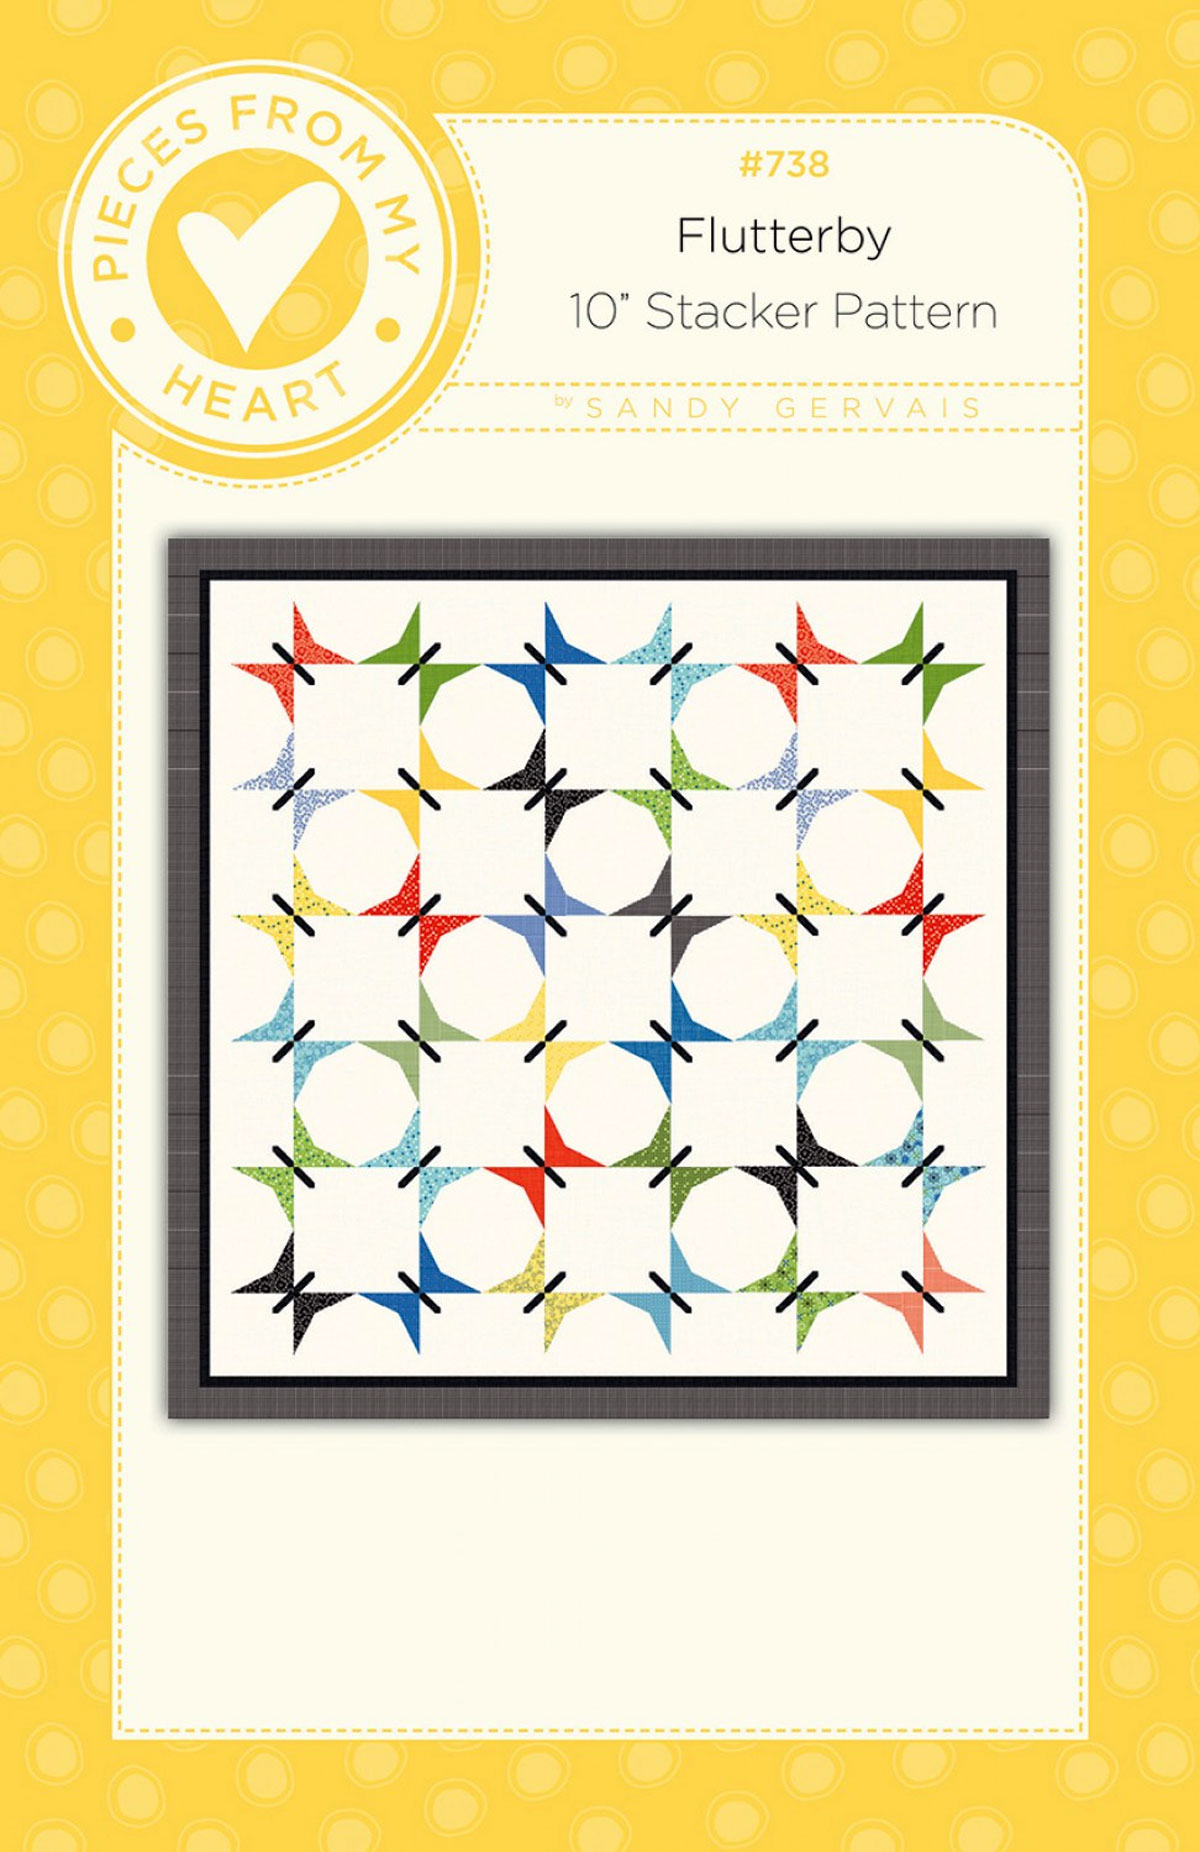 Flutterby-quilt-sewing-pattern-Pieces-From-My-Heart-front